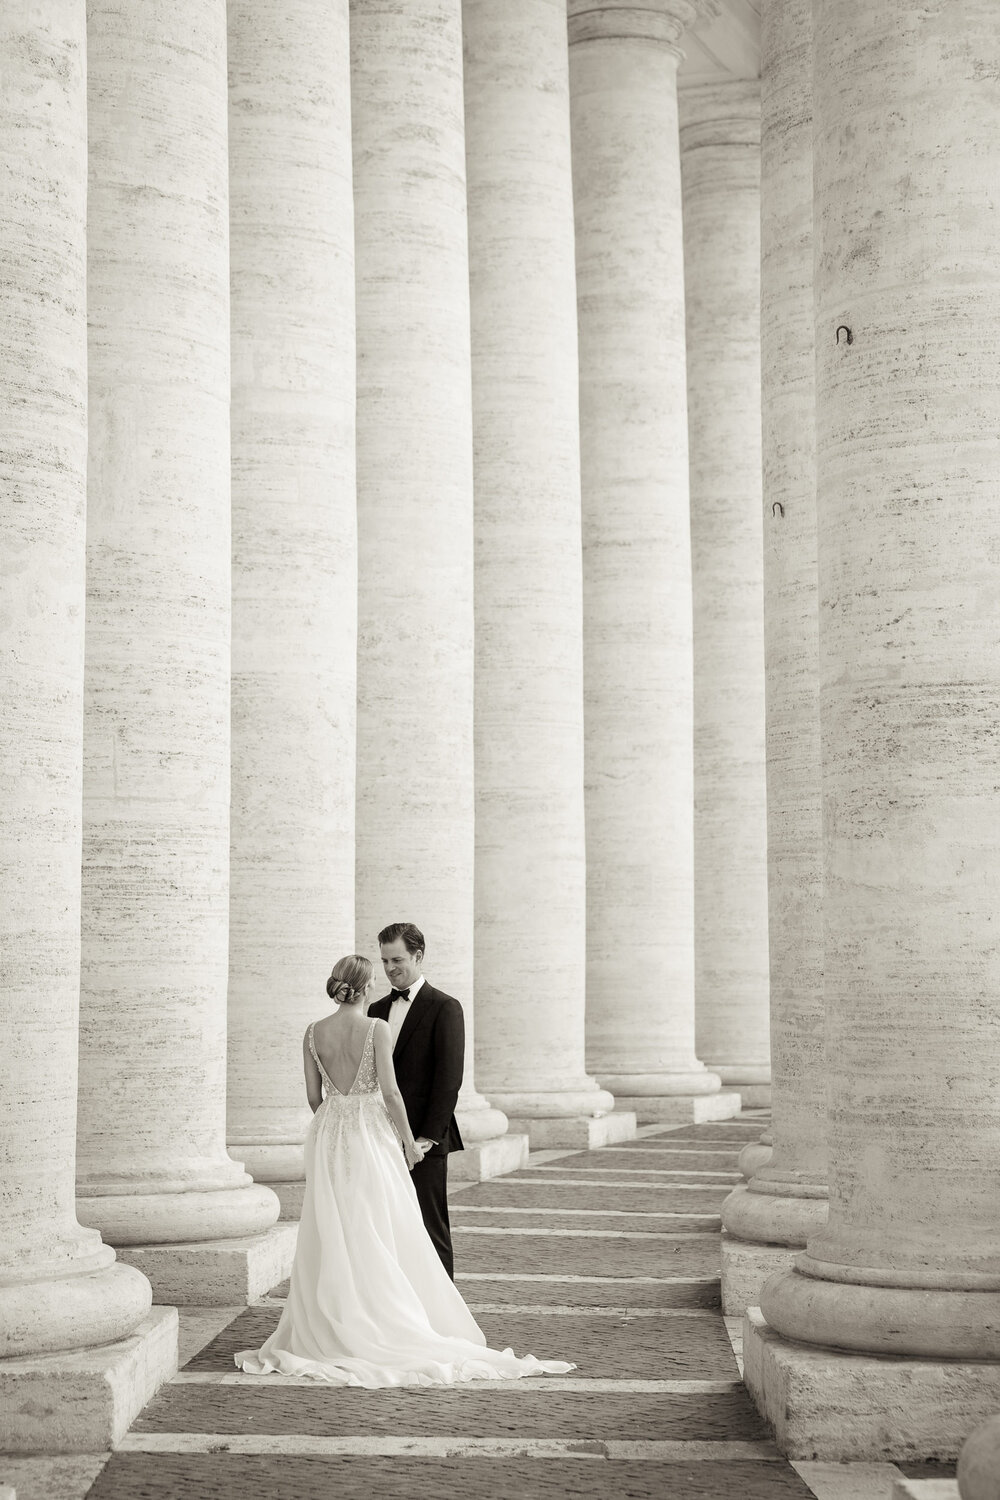 026_bride groom rome photography wedding_featured in vogue italy wedding brian dorsey_0261_Brian Dorsey.jpg